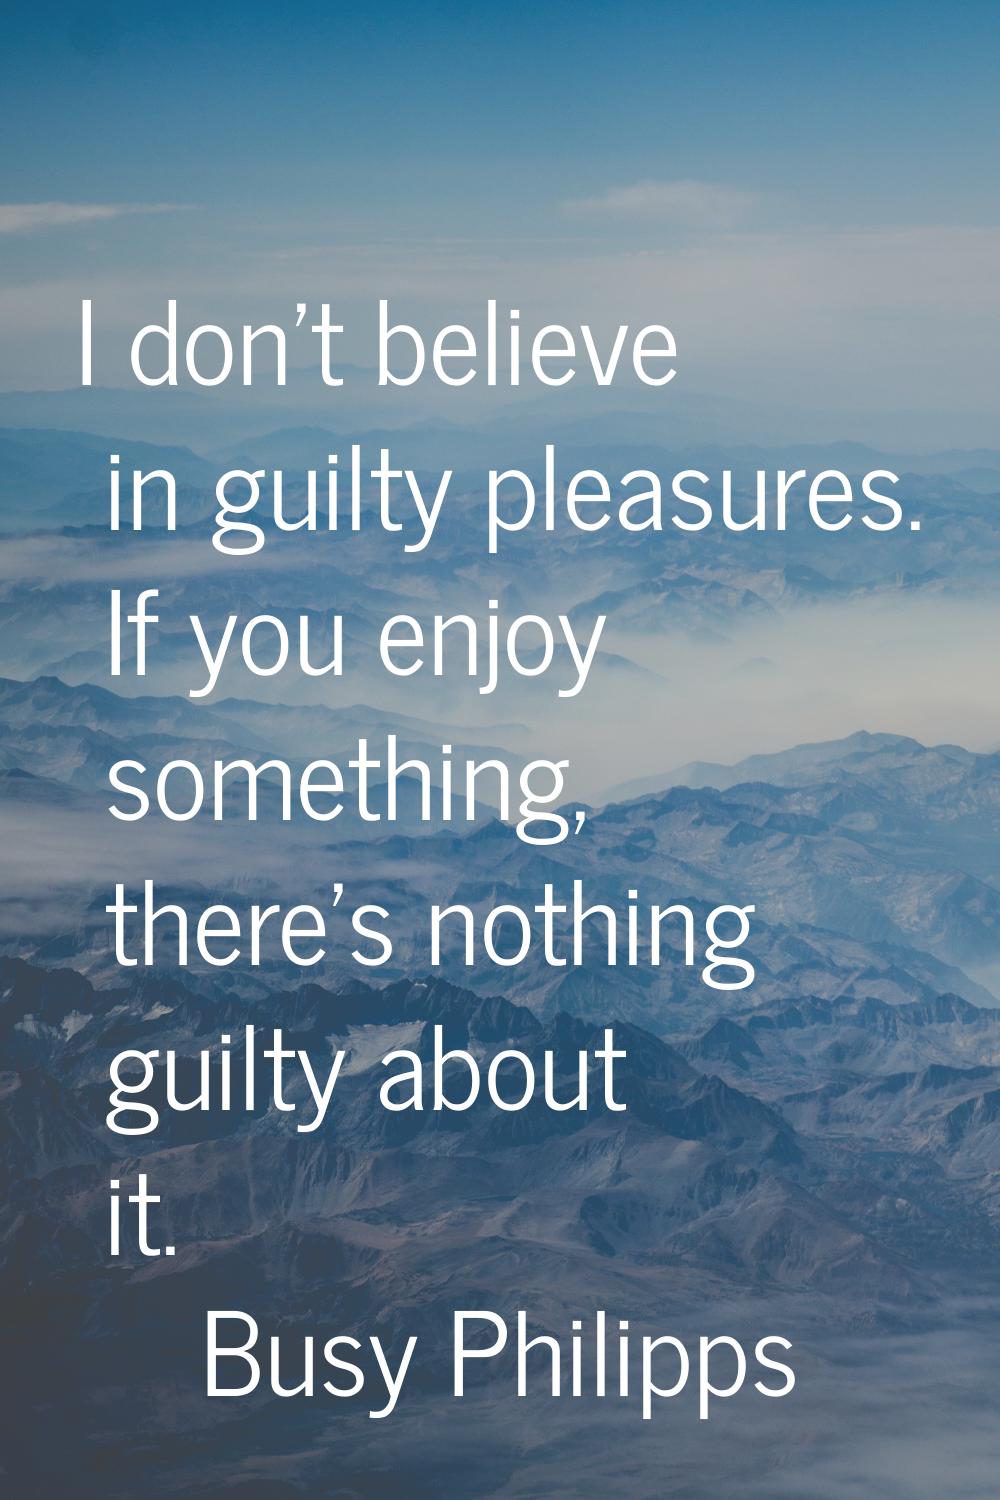 I don't believe in guilty pleasures. If you enjoy something, there's nothing guilty about it.